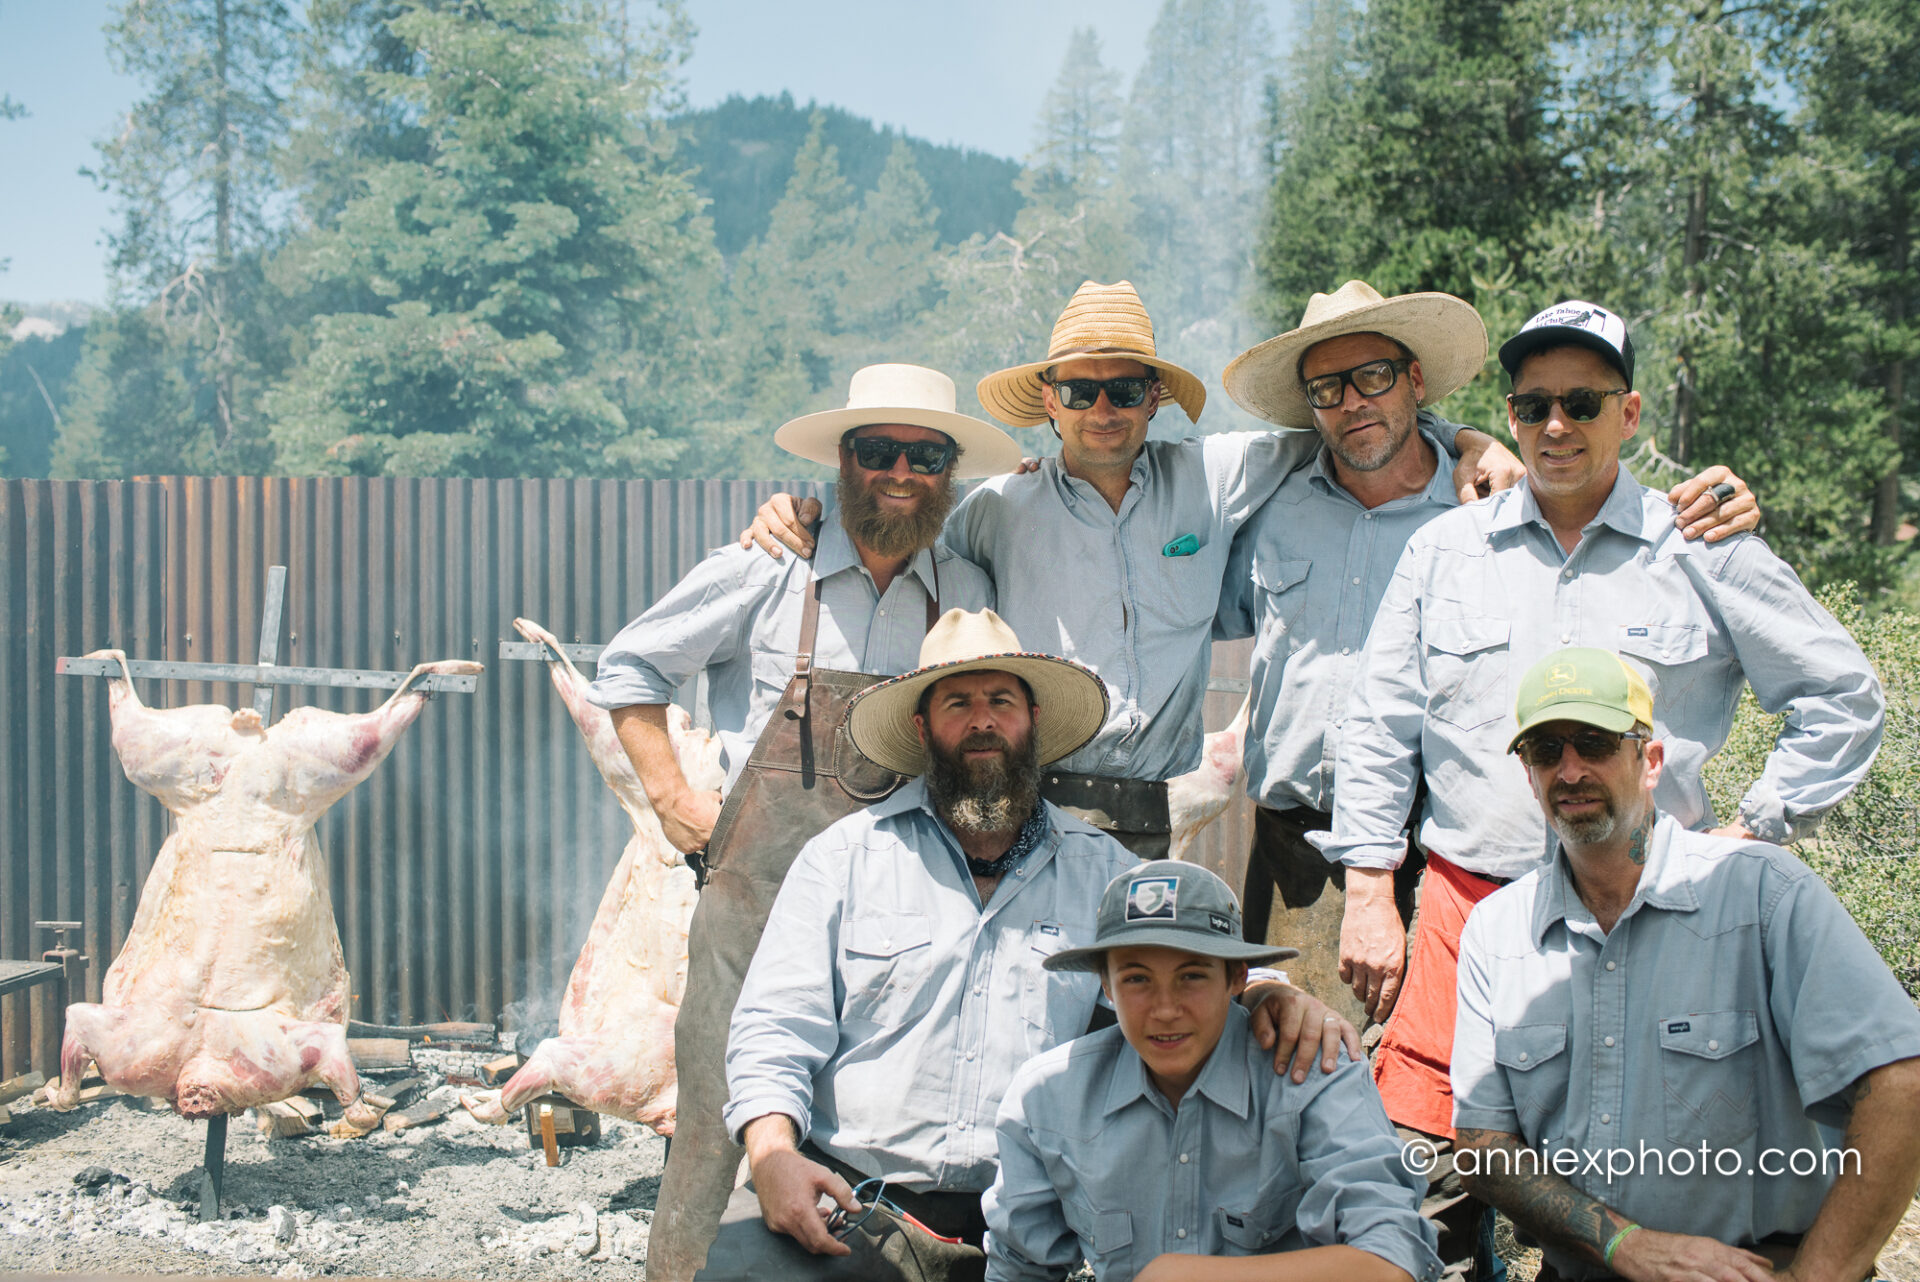 Group of men in front of a pig on a barbecue pit